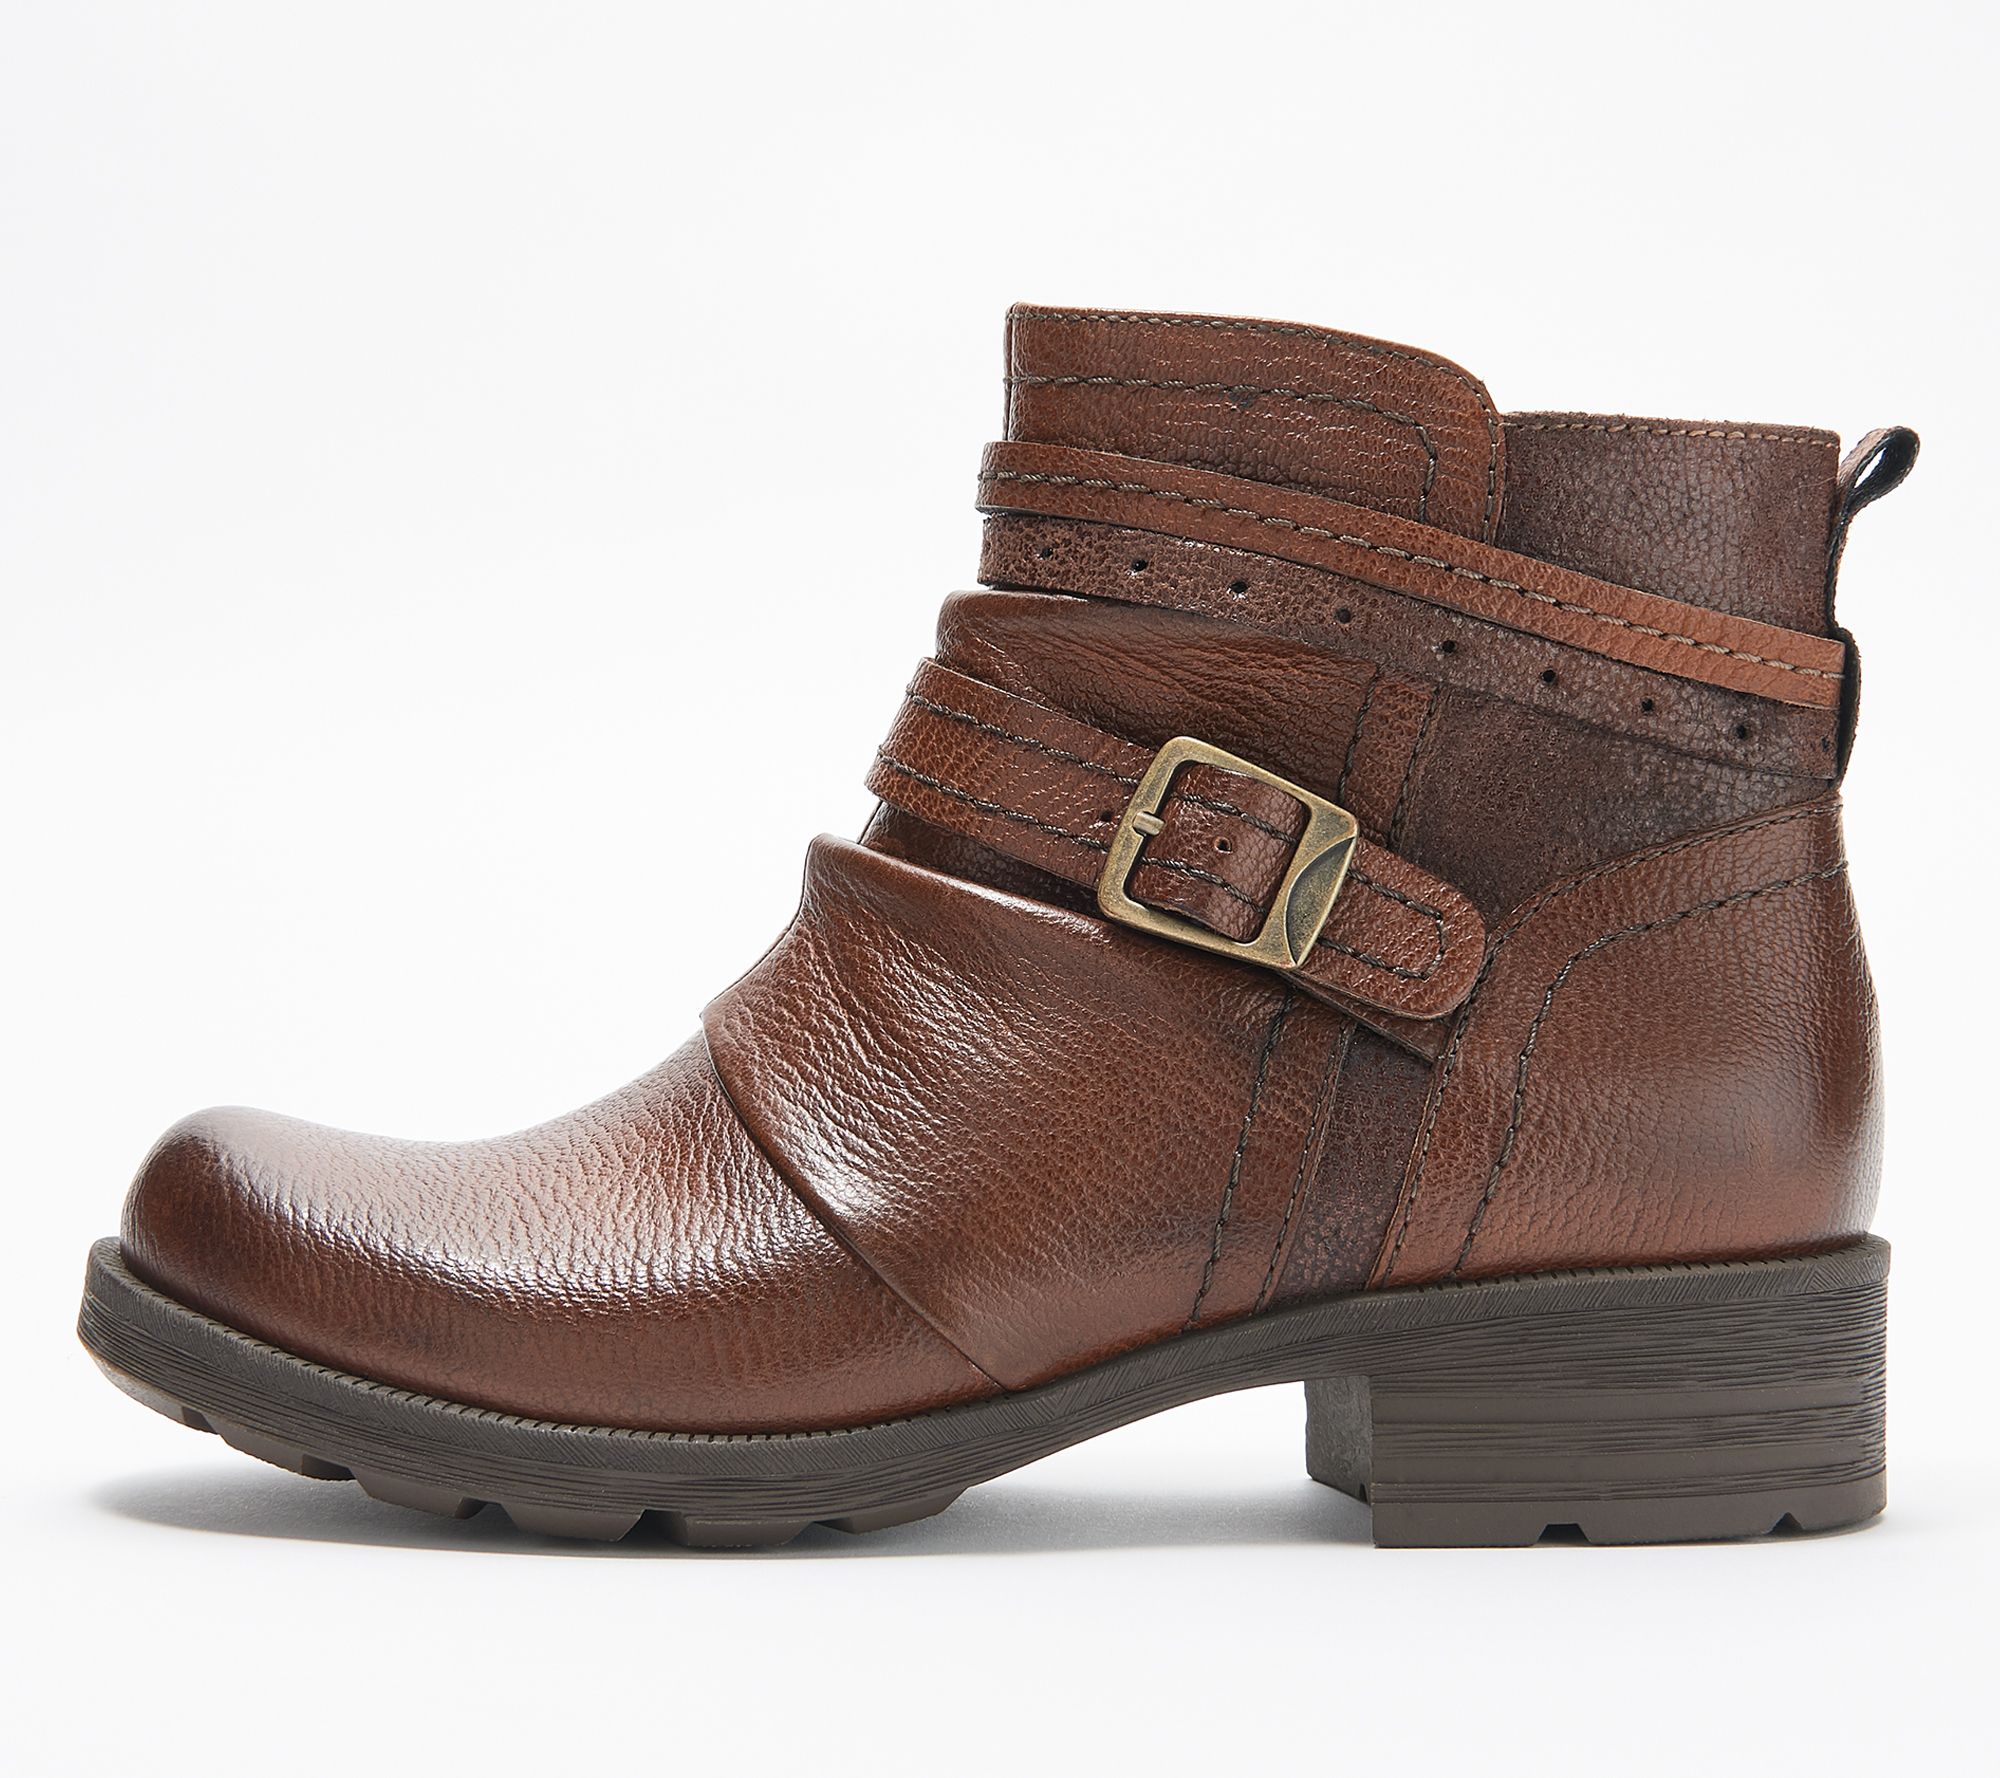 Earth Origins Leather Ankle Boots with Buckle - Randi Roland - QVC.com